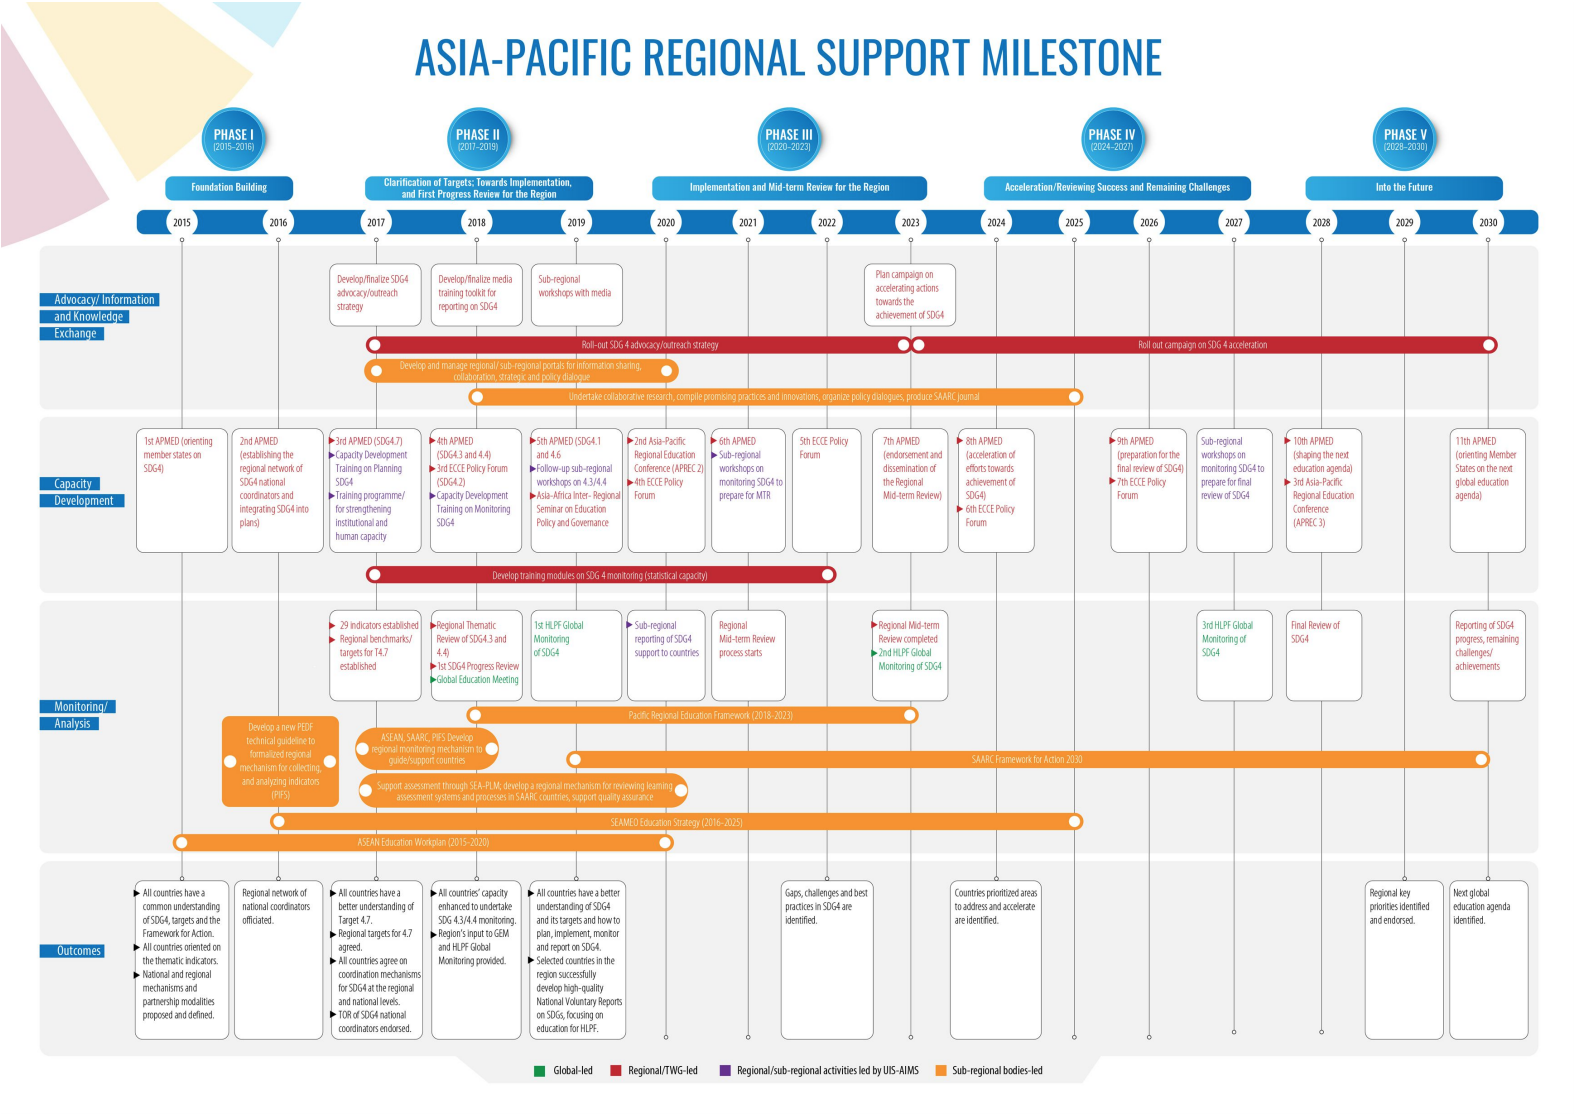 The Asia-Pacific Education2030 Roadmap